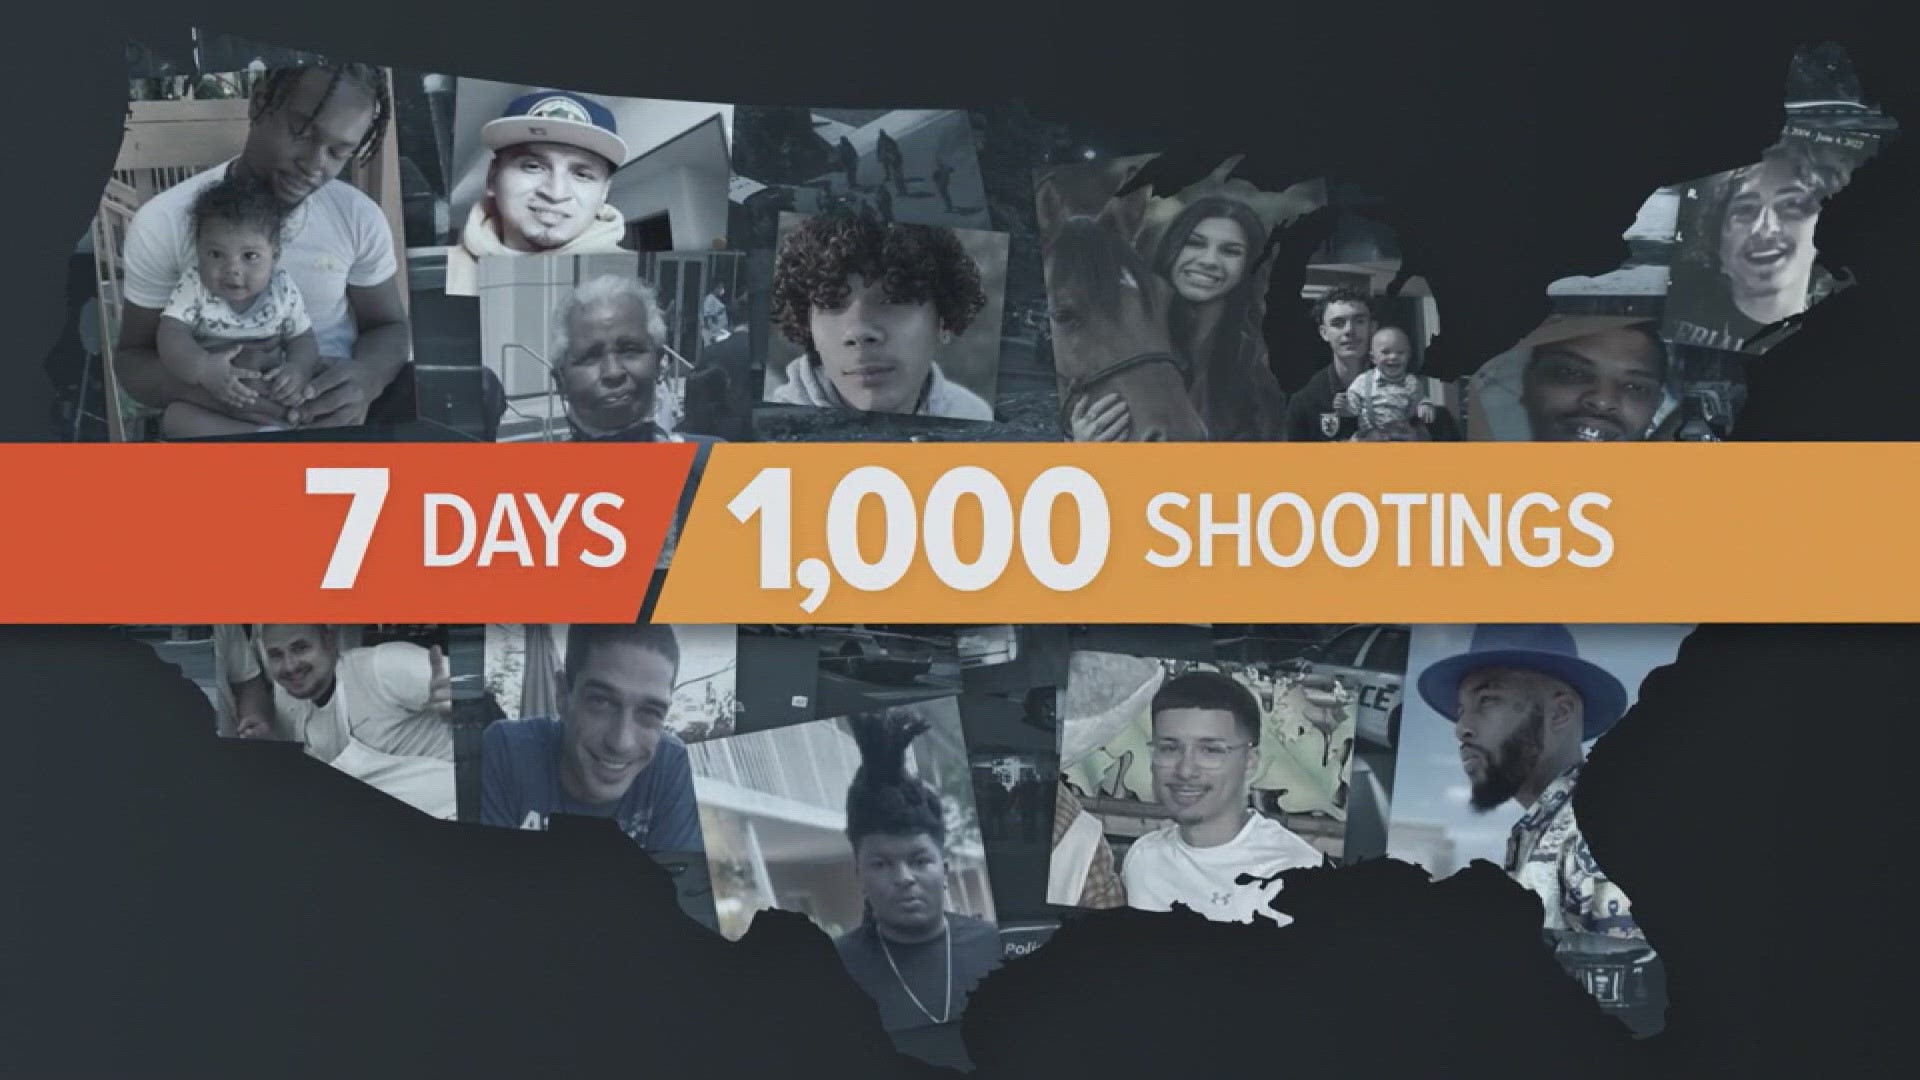 TEGNA stations across the U.S. looked into gun violence from May 29, 2022 to June 4, 2022 to gain a better understanding of how the loss of life impacts us all.